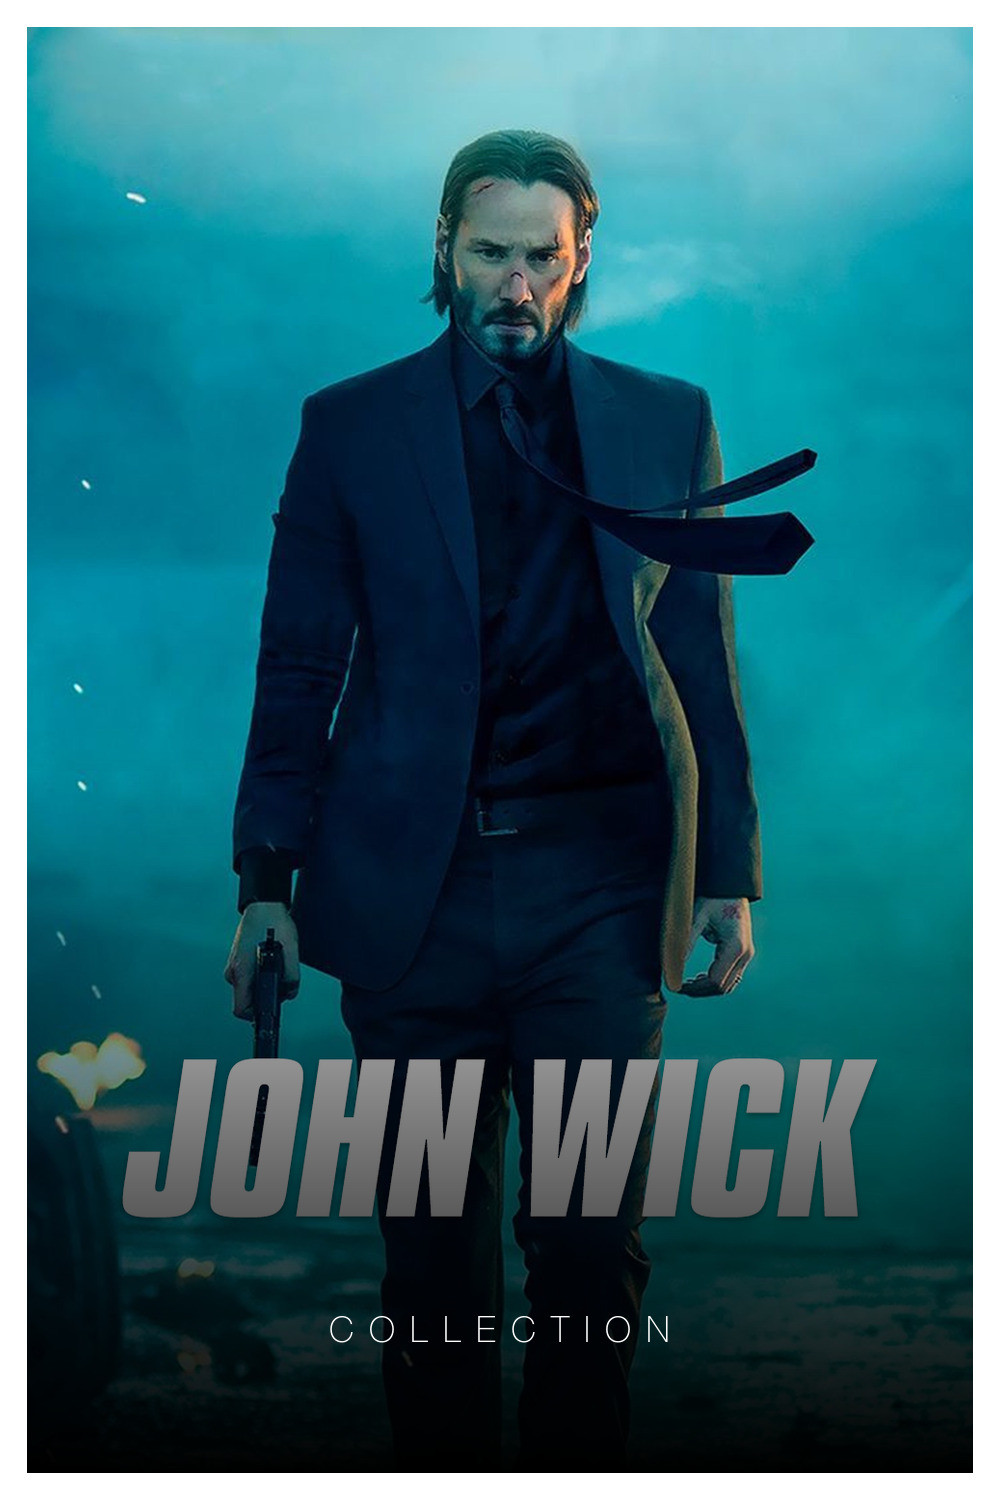 John Wick collection - Plex Collection Posters